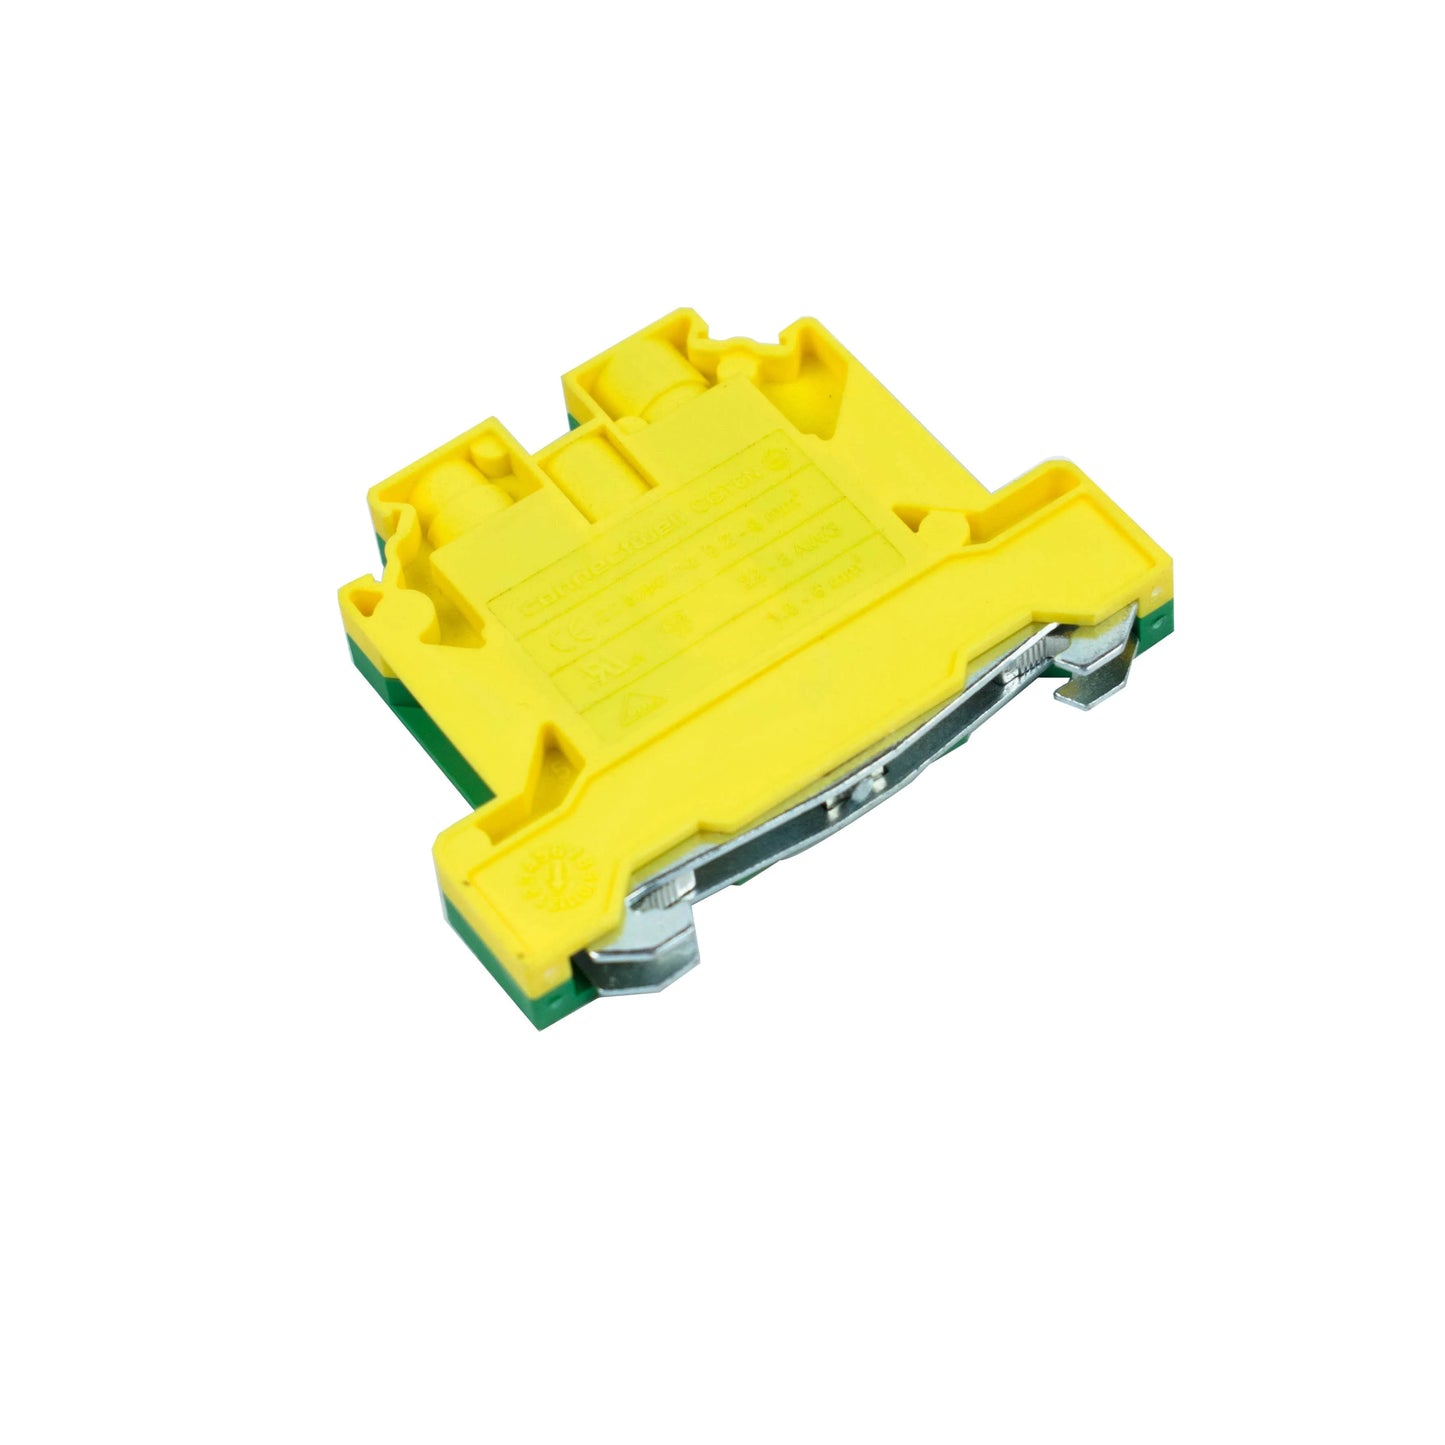 Connectwell CGT10N 10sq mm Screw Clamp Ground Terminal Block (